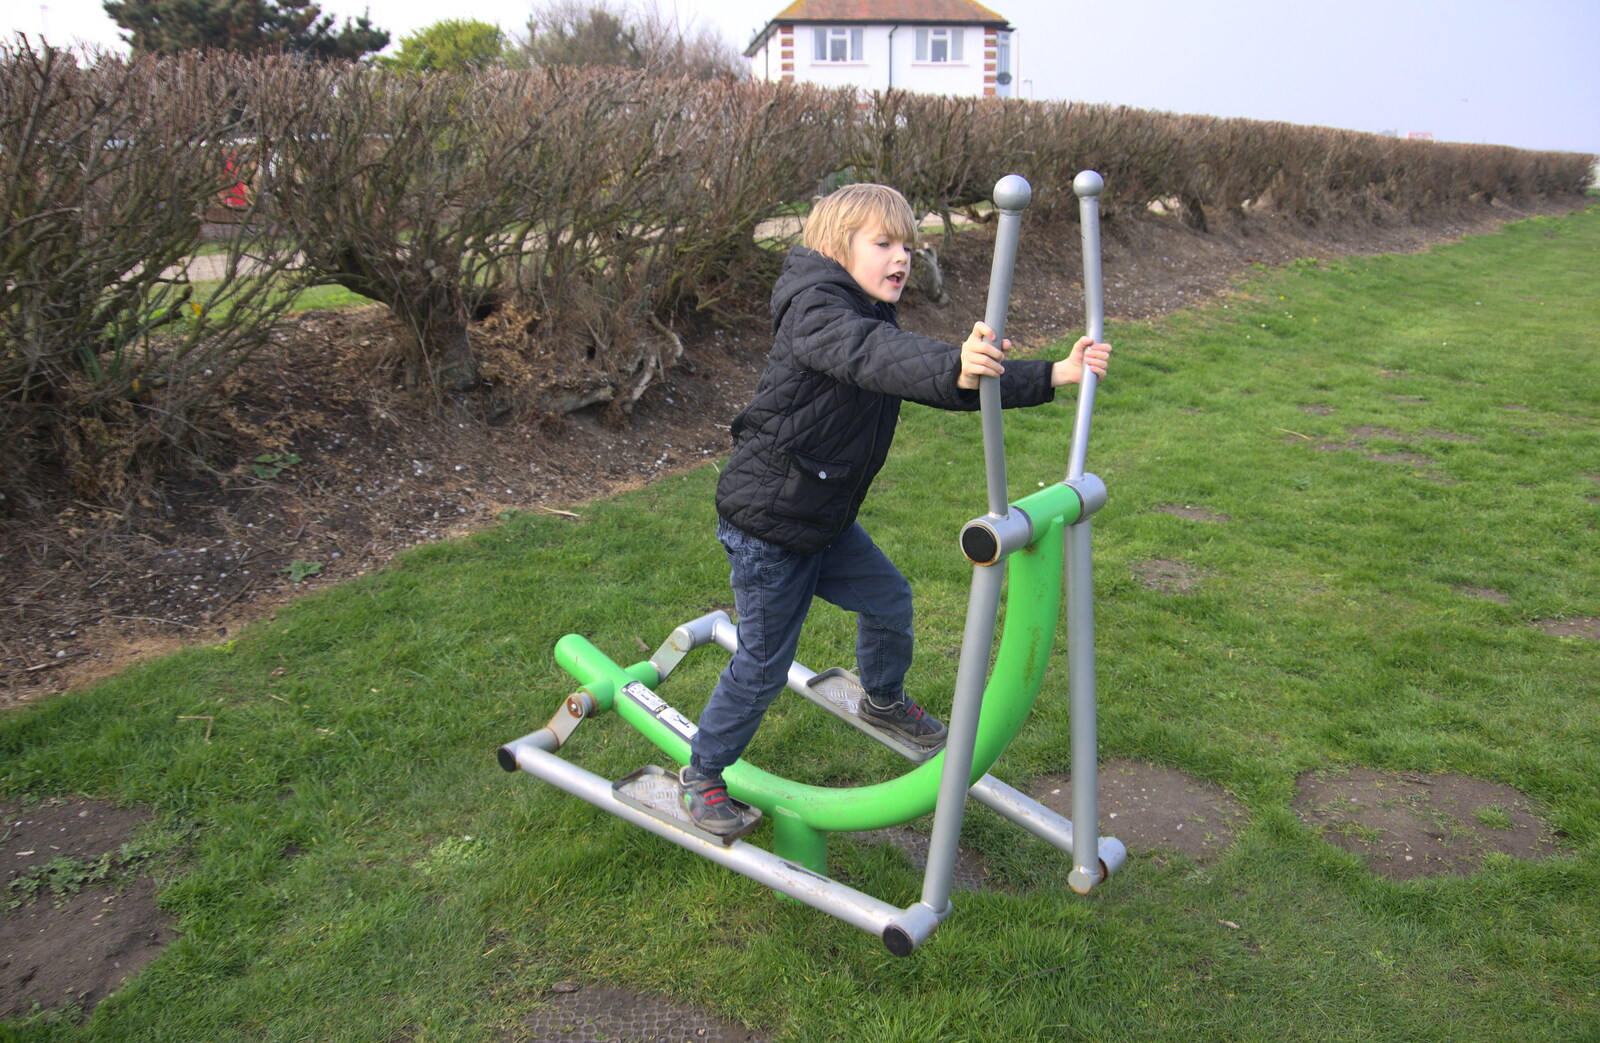 Harry on the exercise equipment from On The Beach, Southwold, Suffolk - 7th April 2019